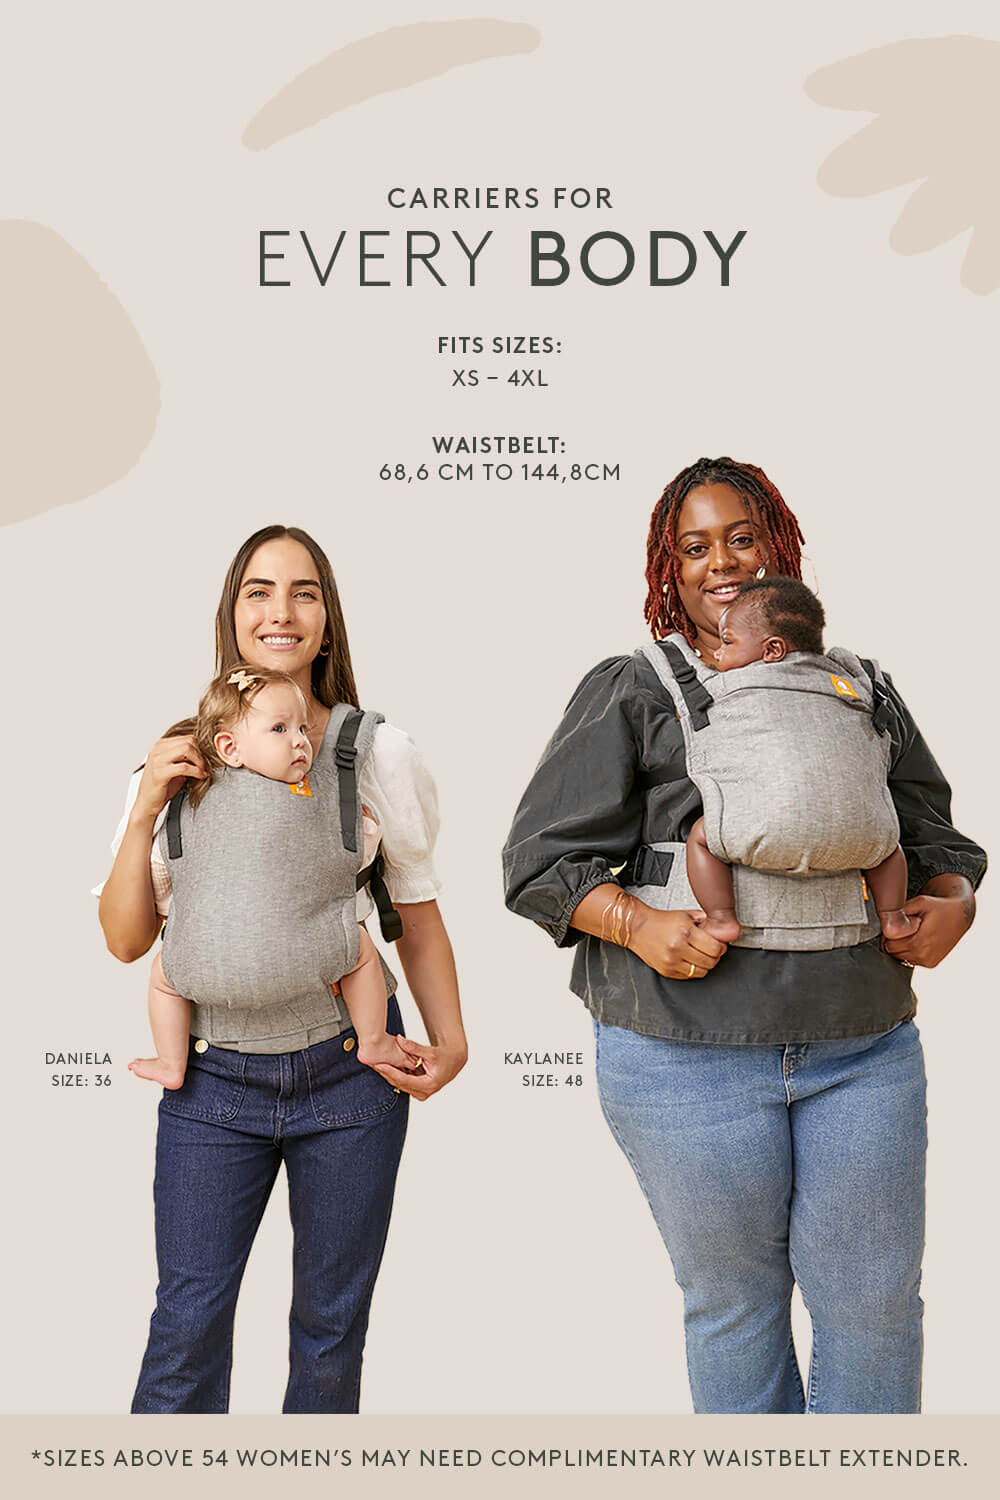 Beyond - Mesh Free-to-Grow Baby Carrier